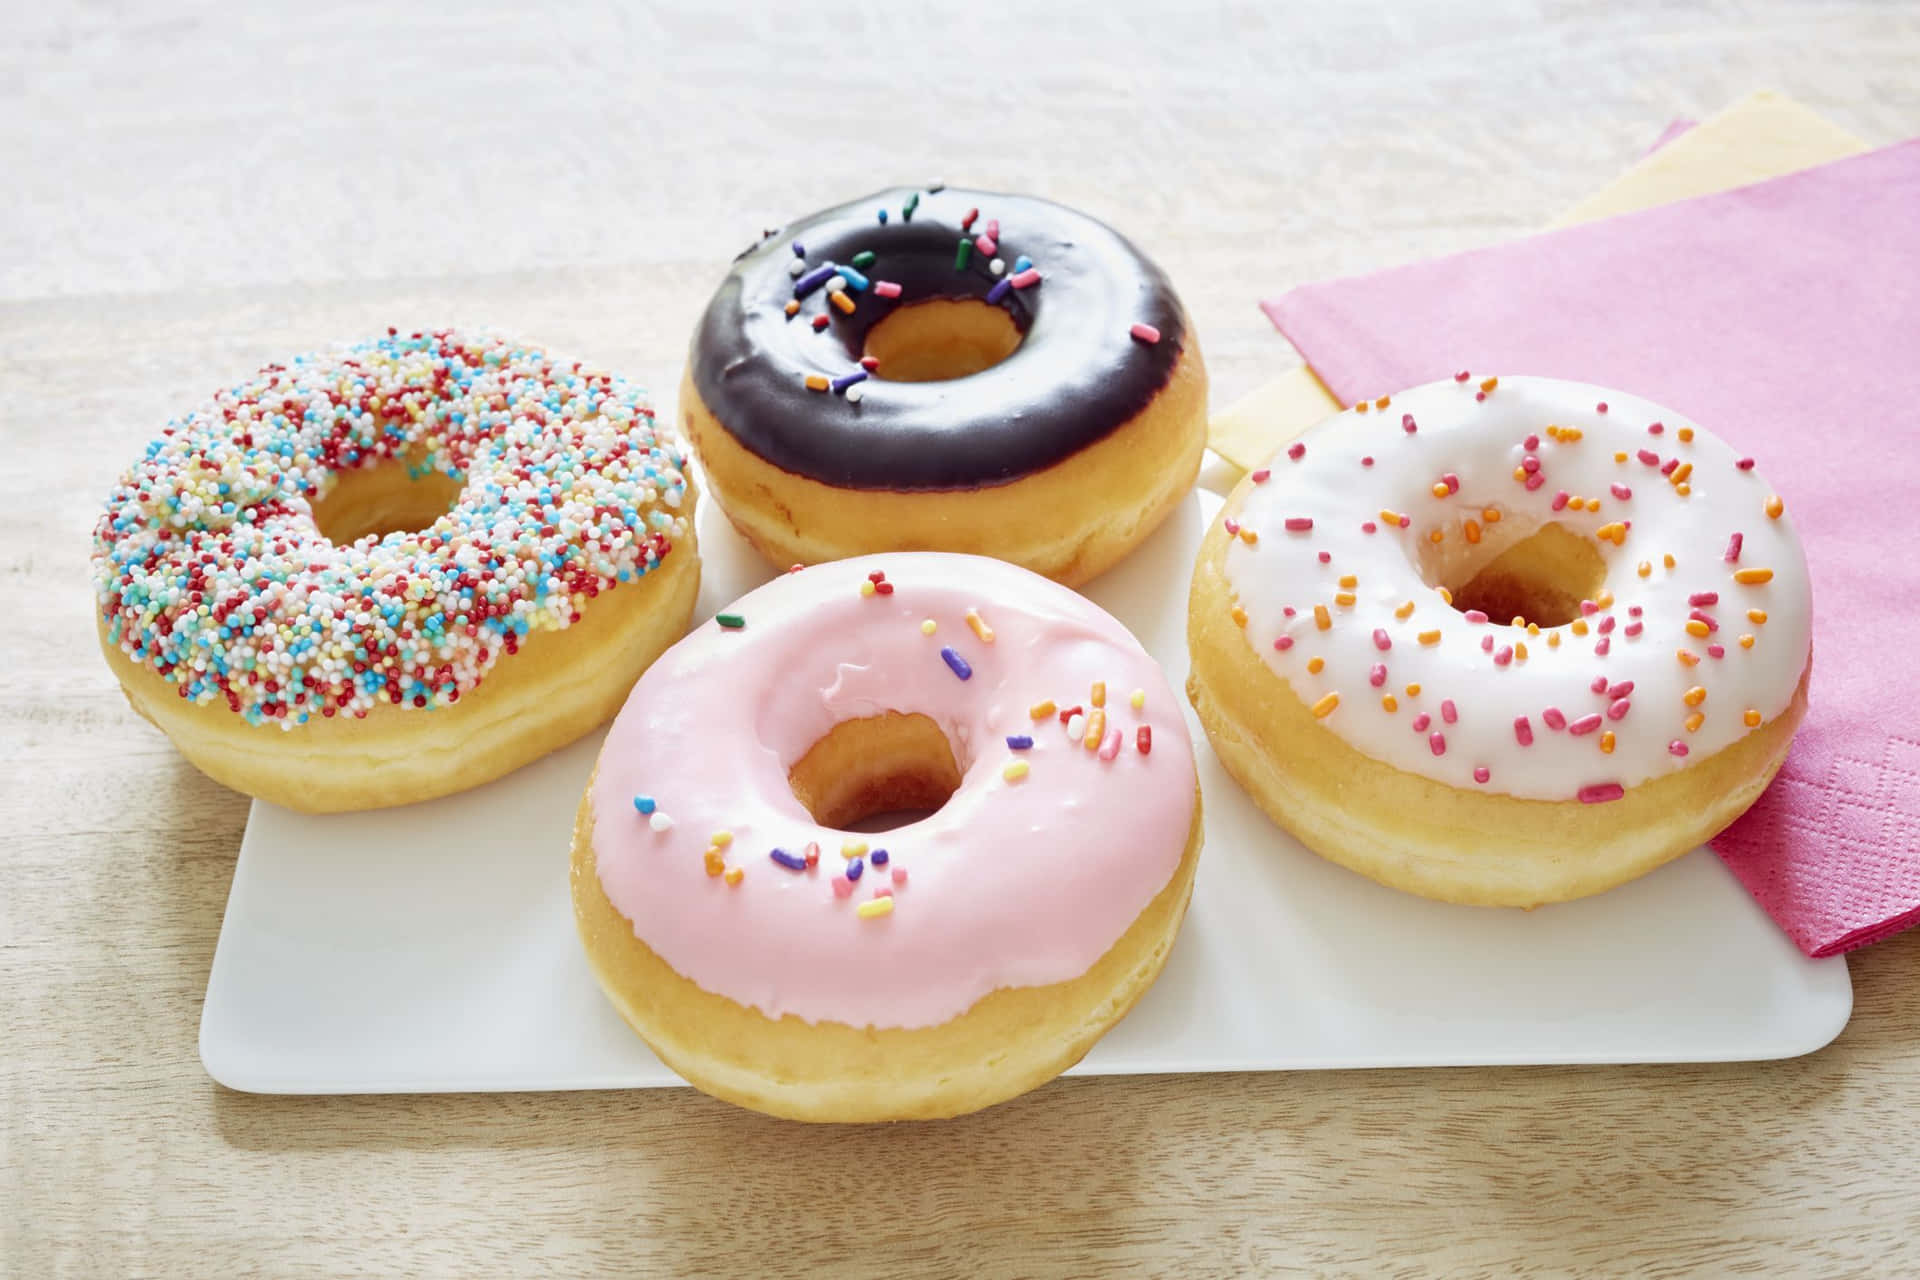 Delicious and mouthwatering donuts — the perfect treat!